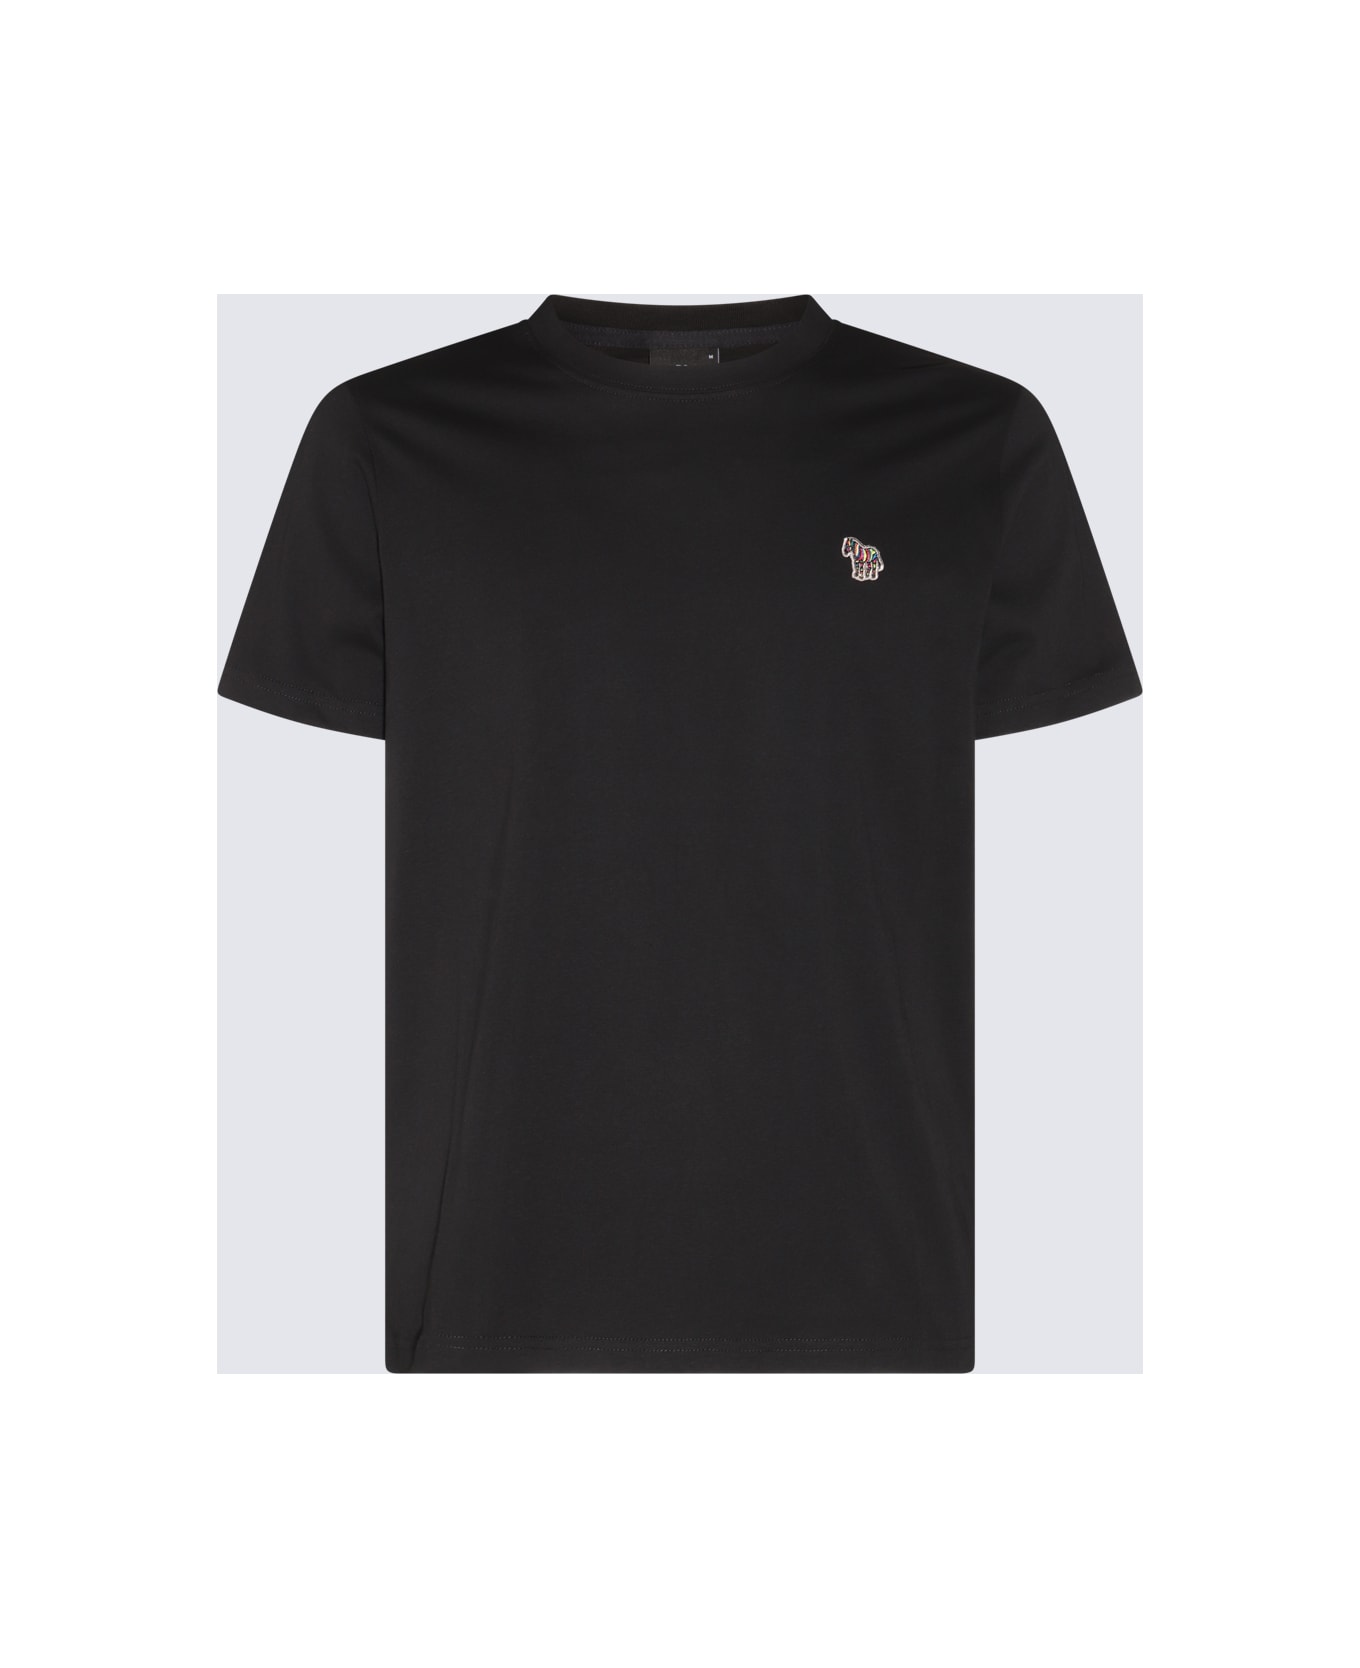 PS by Paul Smith Black Cotton T-shirt - BLACK シャツ